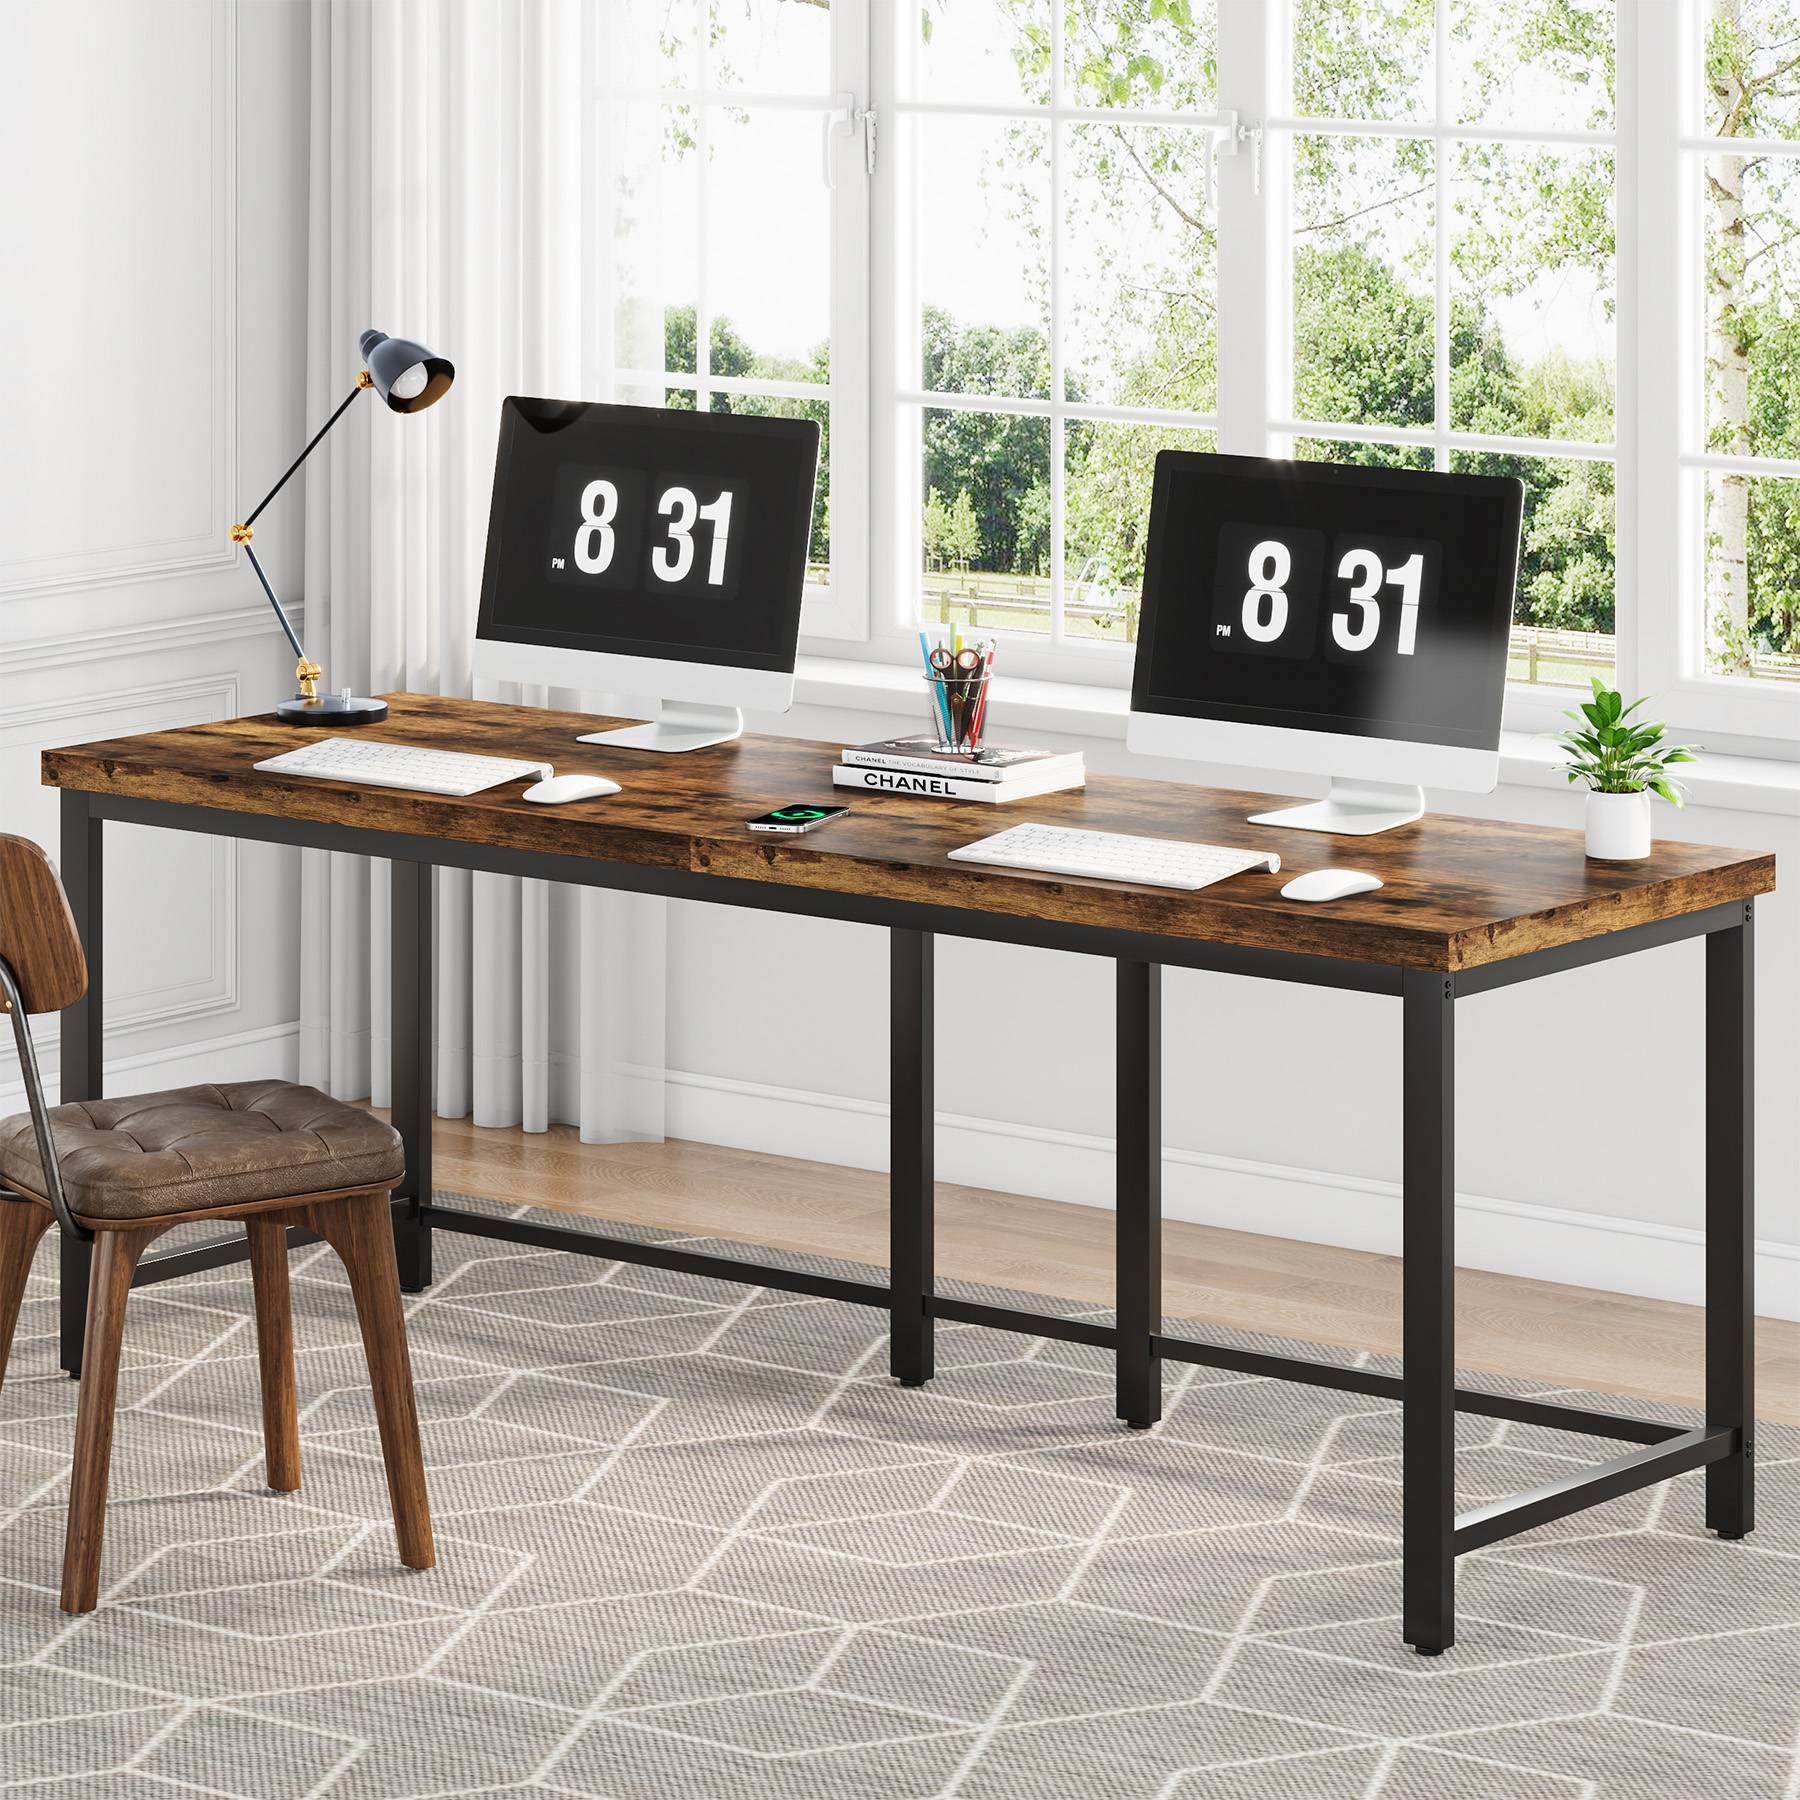 Tribesigns - Two Person Desk, 2 Person Desk, 78.7-Inch Double Computer Desk Study Writing Table, Brown & Black